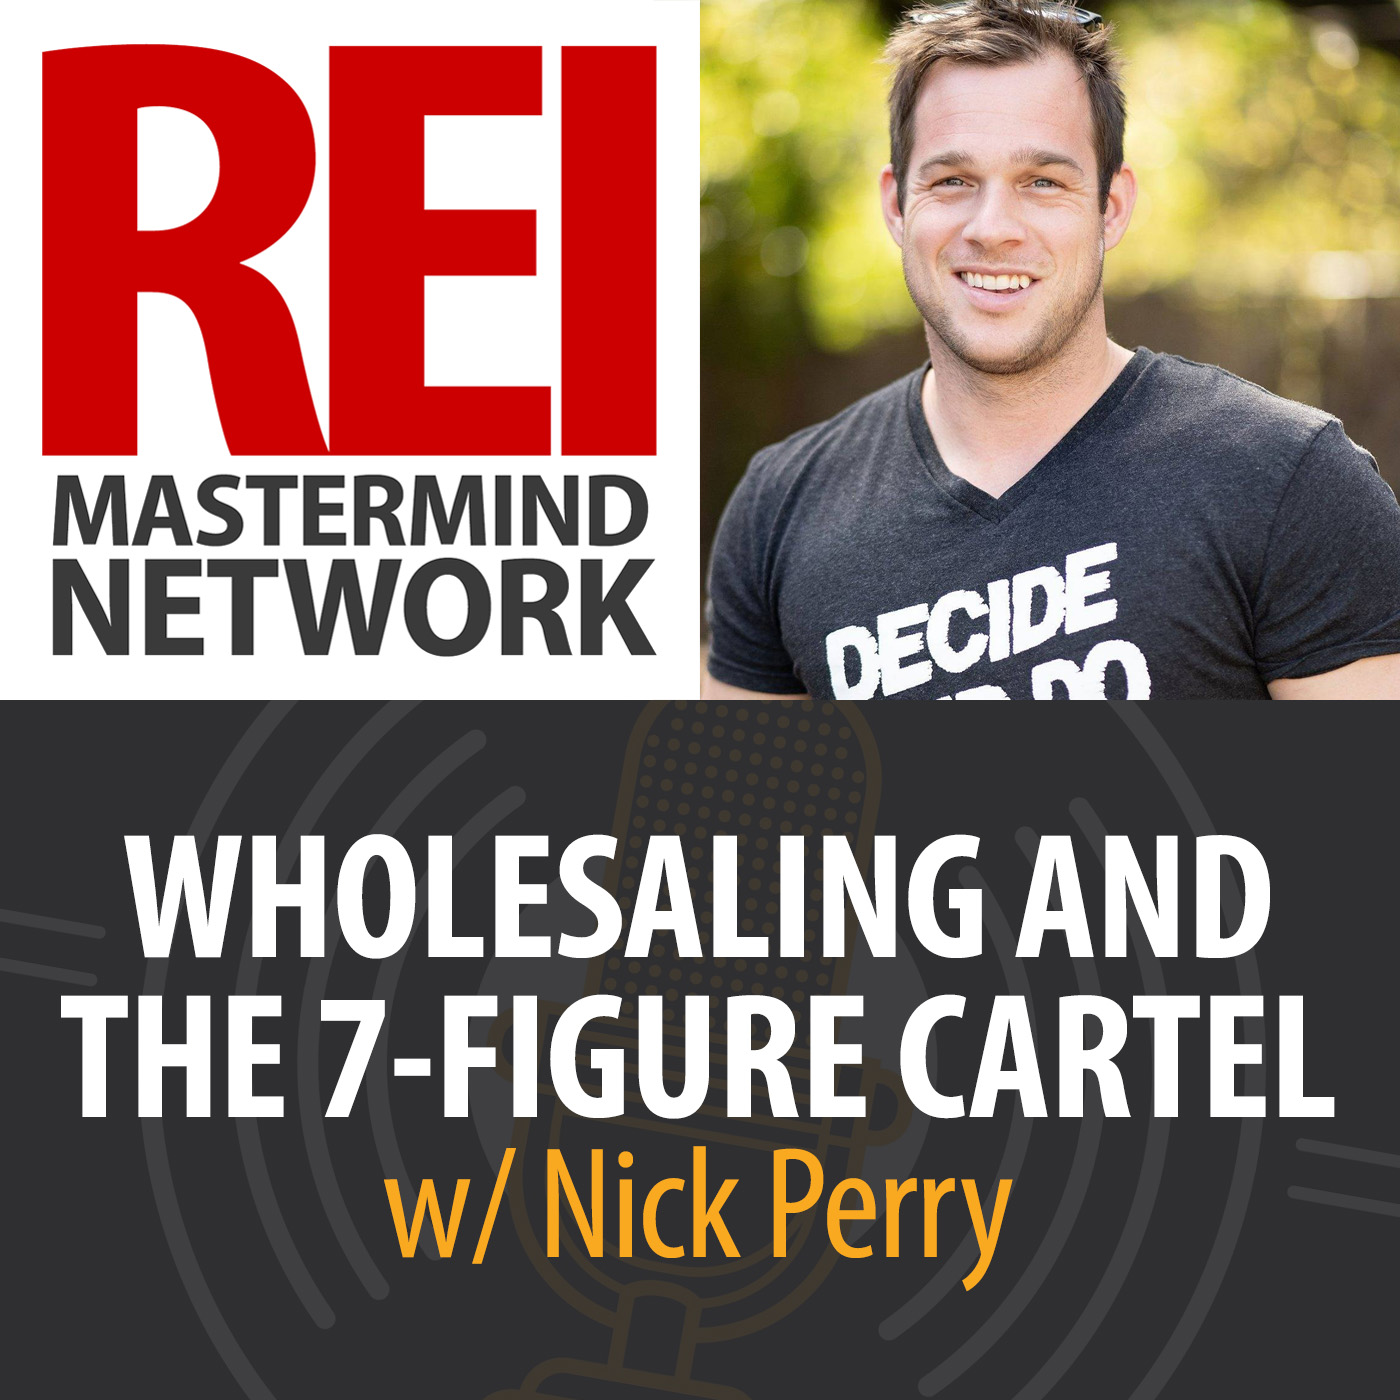 Wholesaling and the 7-Figure Cartel with Nick Perry